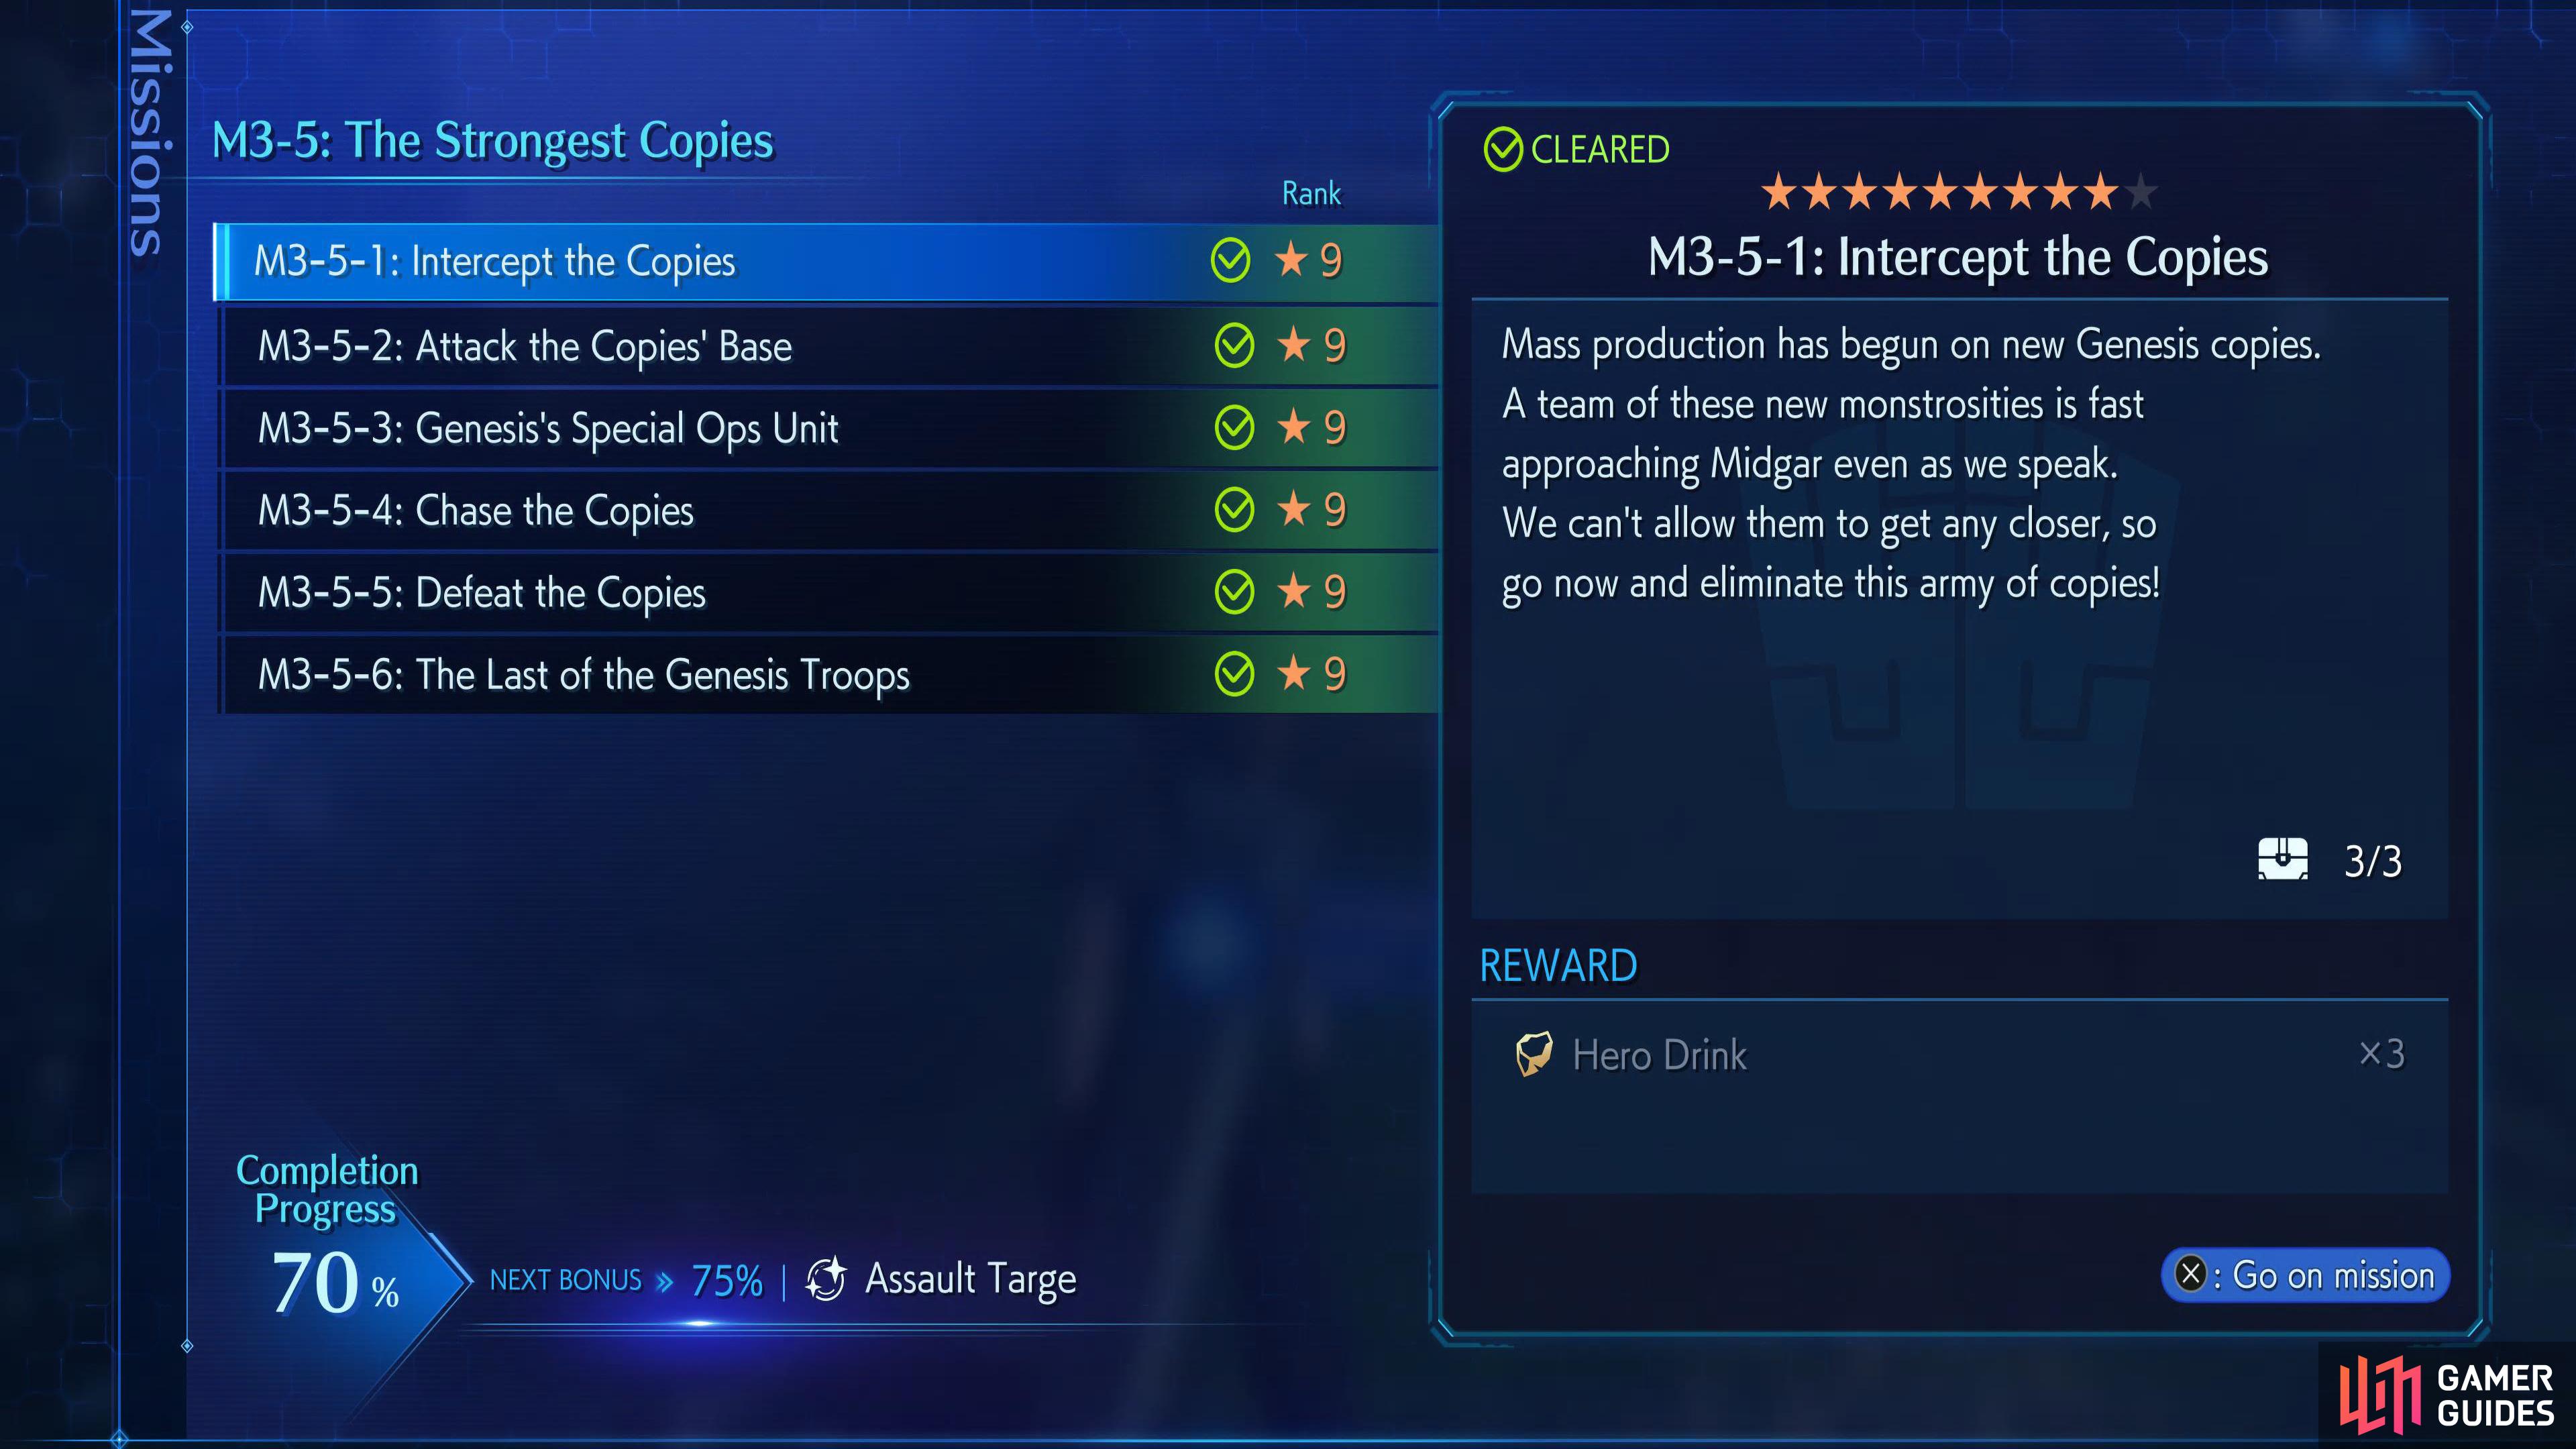 You’ll need to complete the previous categories to unlock this set of missions.